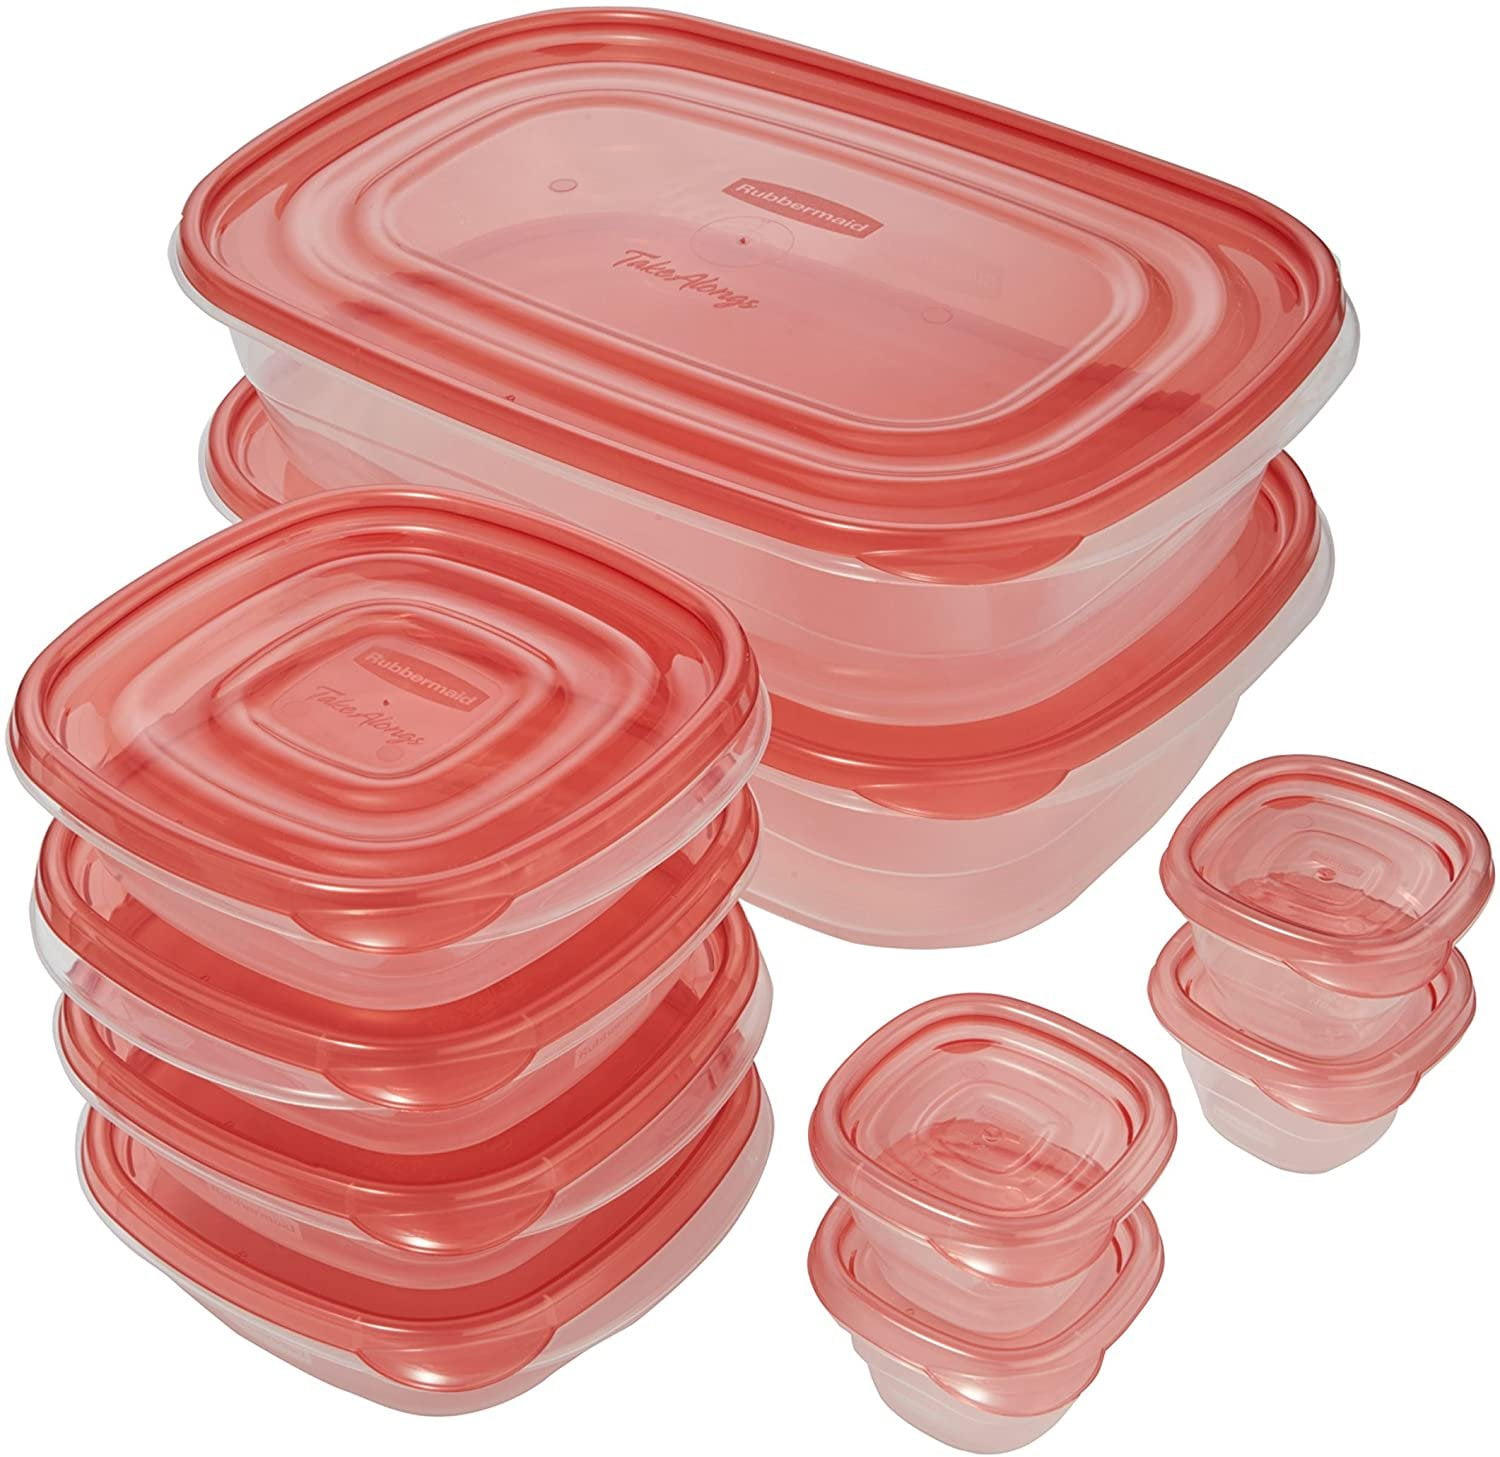  Rubbermaid TakeAlongs Sandwich Food Storage Containers, 2.9  Cup, Tint Chili, 4 Count : Home & Kitchen